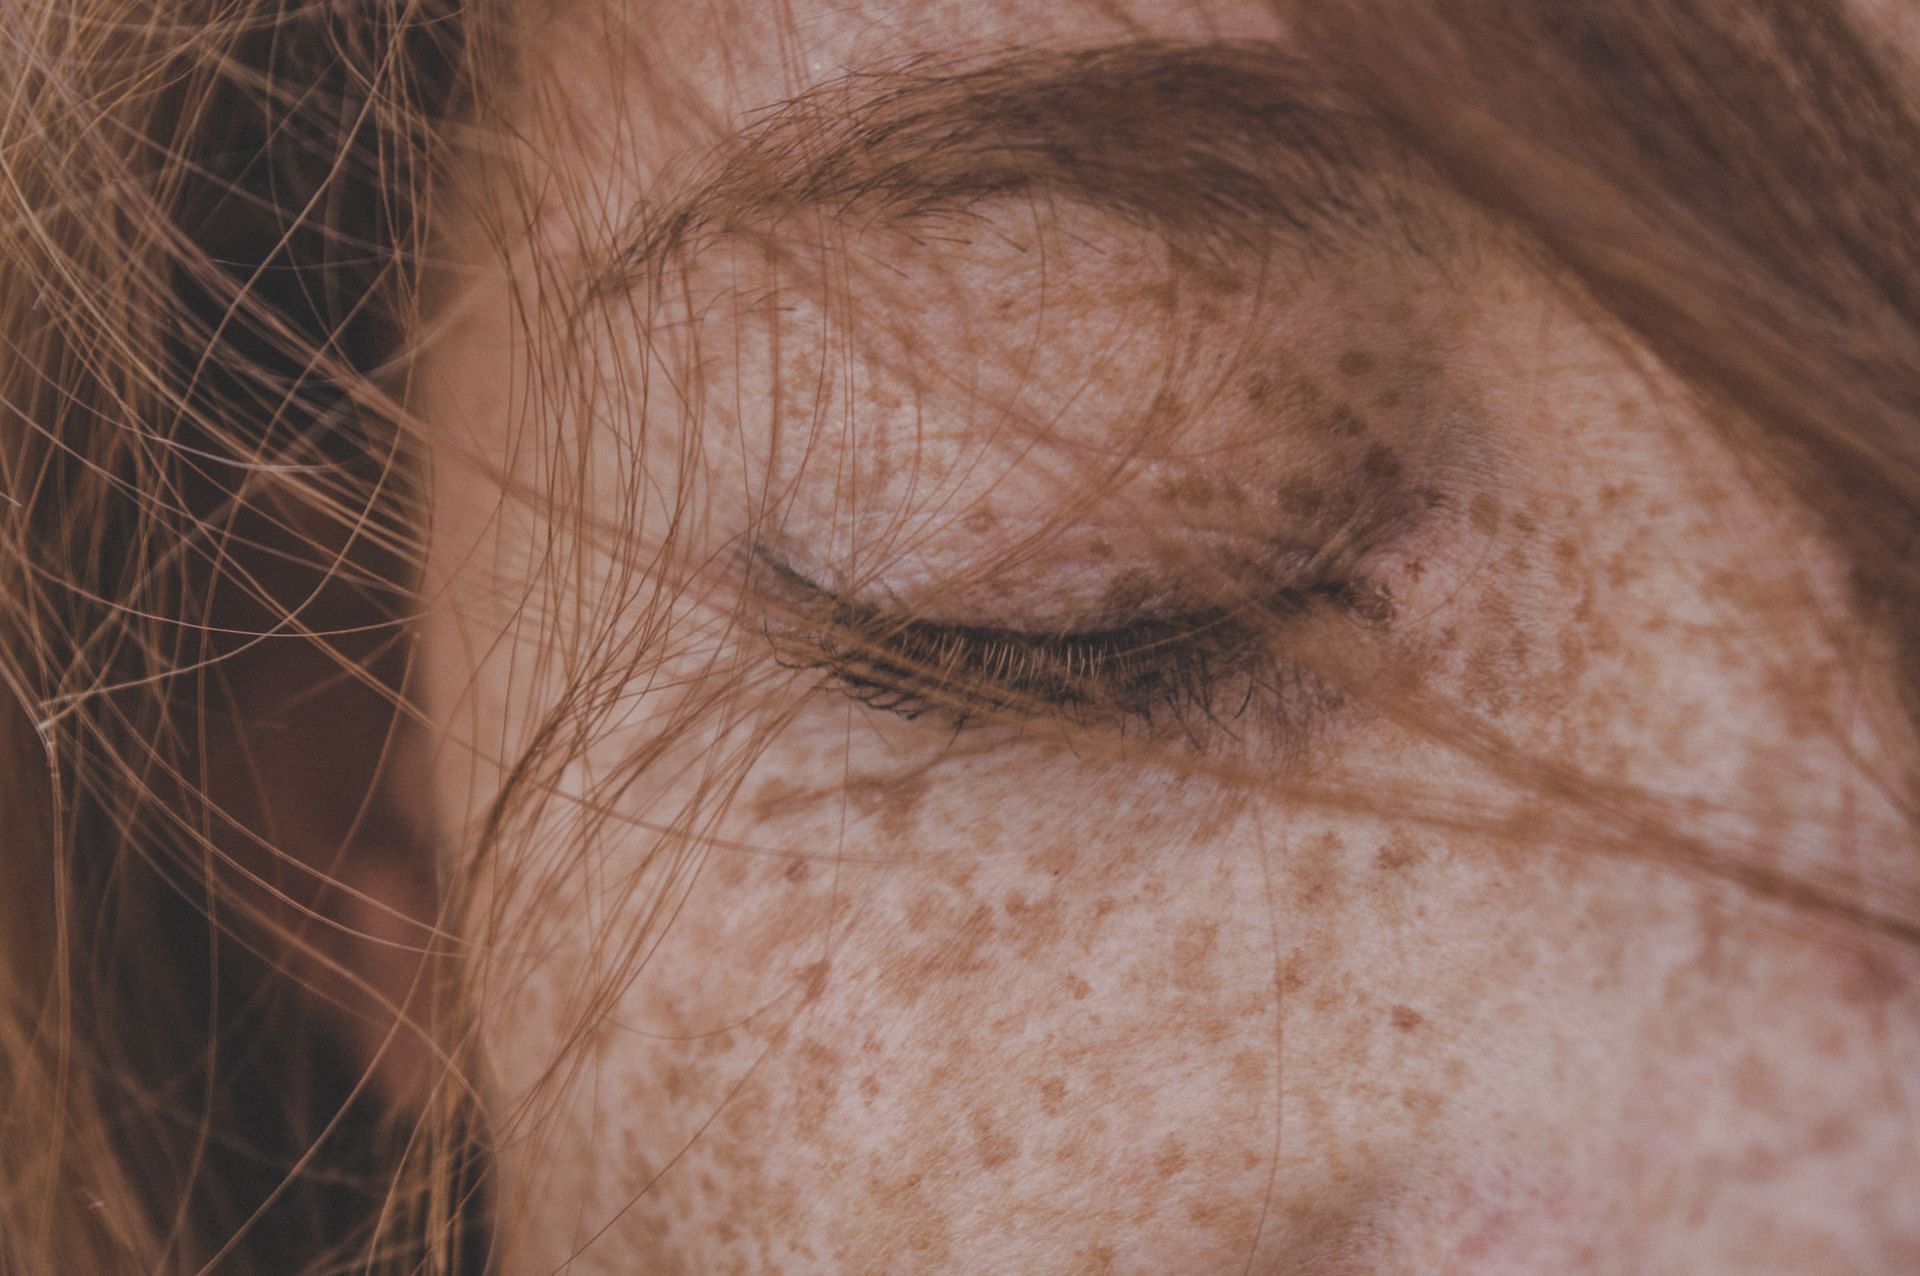 Pigmentation is one of the main side effects. (Image via Unsplash/Chermiti Mohamed)